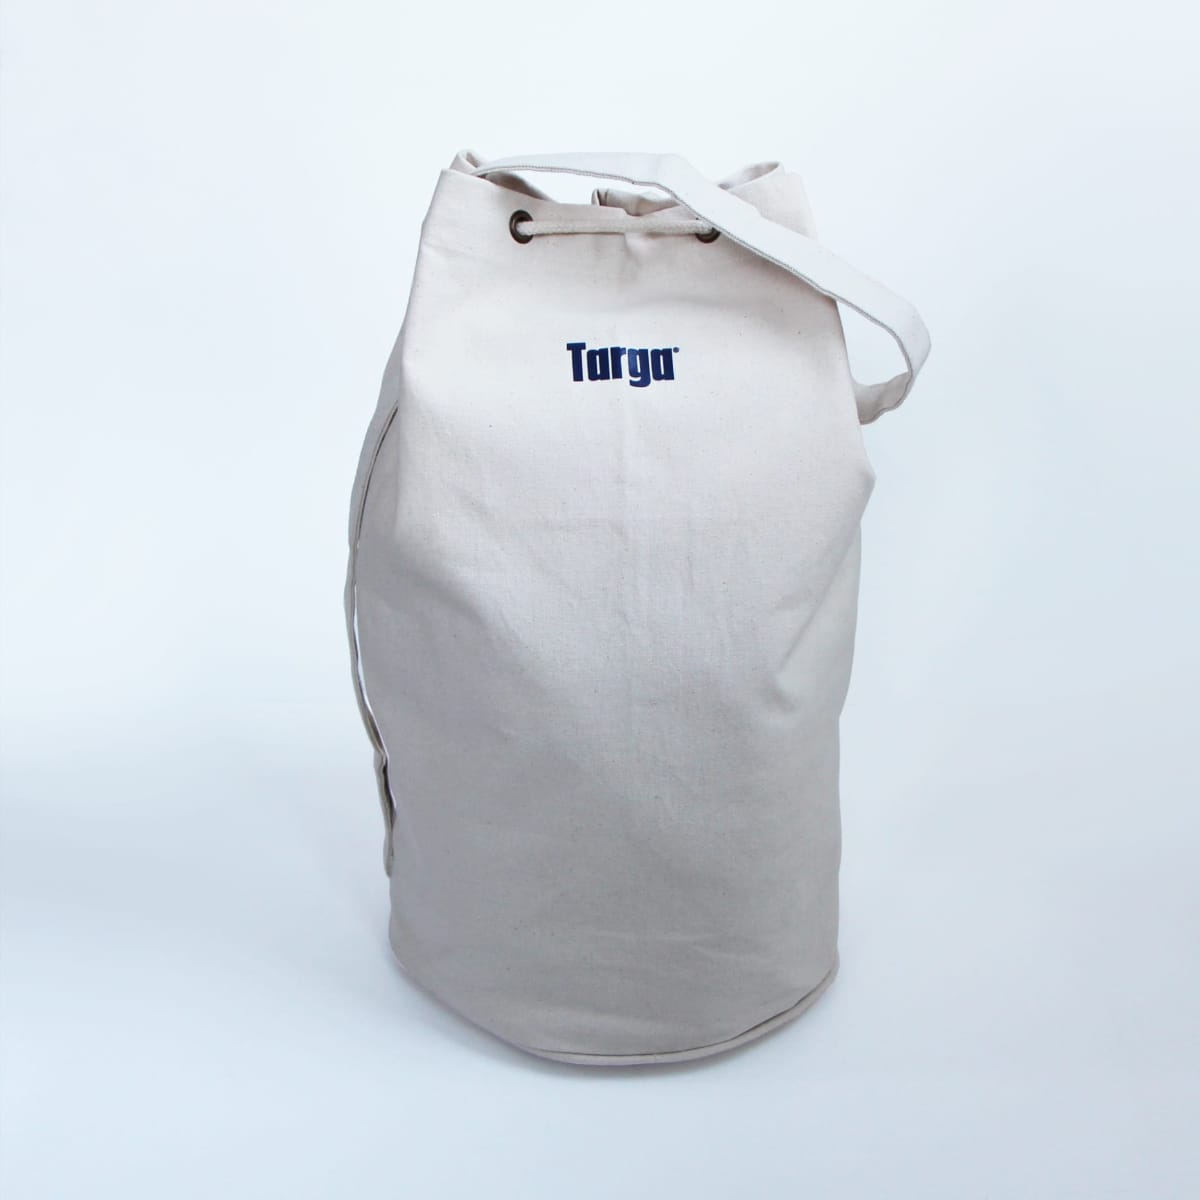 Sailor bag perfect as laundry bag, for using in the harbour or for onboard storing